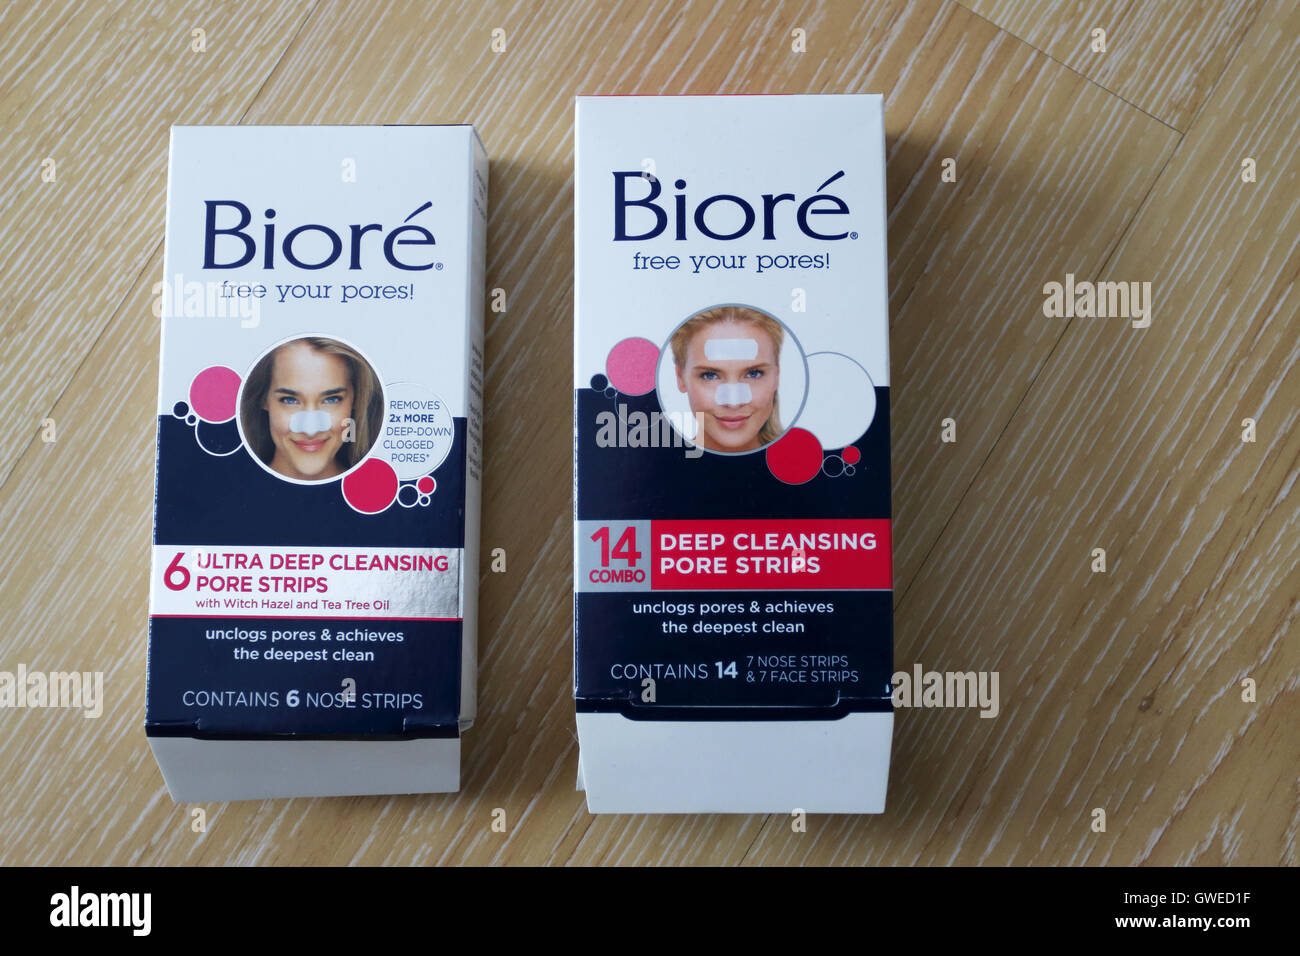 STOCK PHOTO. NOT ACTUAL PRODUCT. Biore deep cleansing pore strips Stock Photo